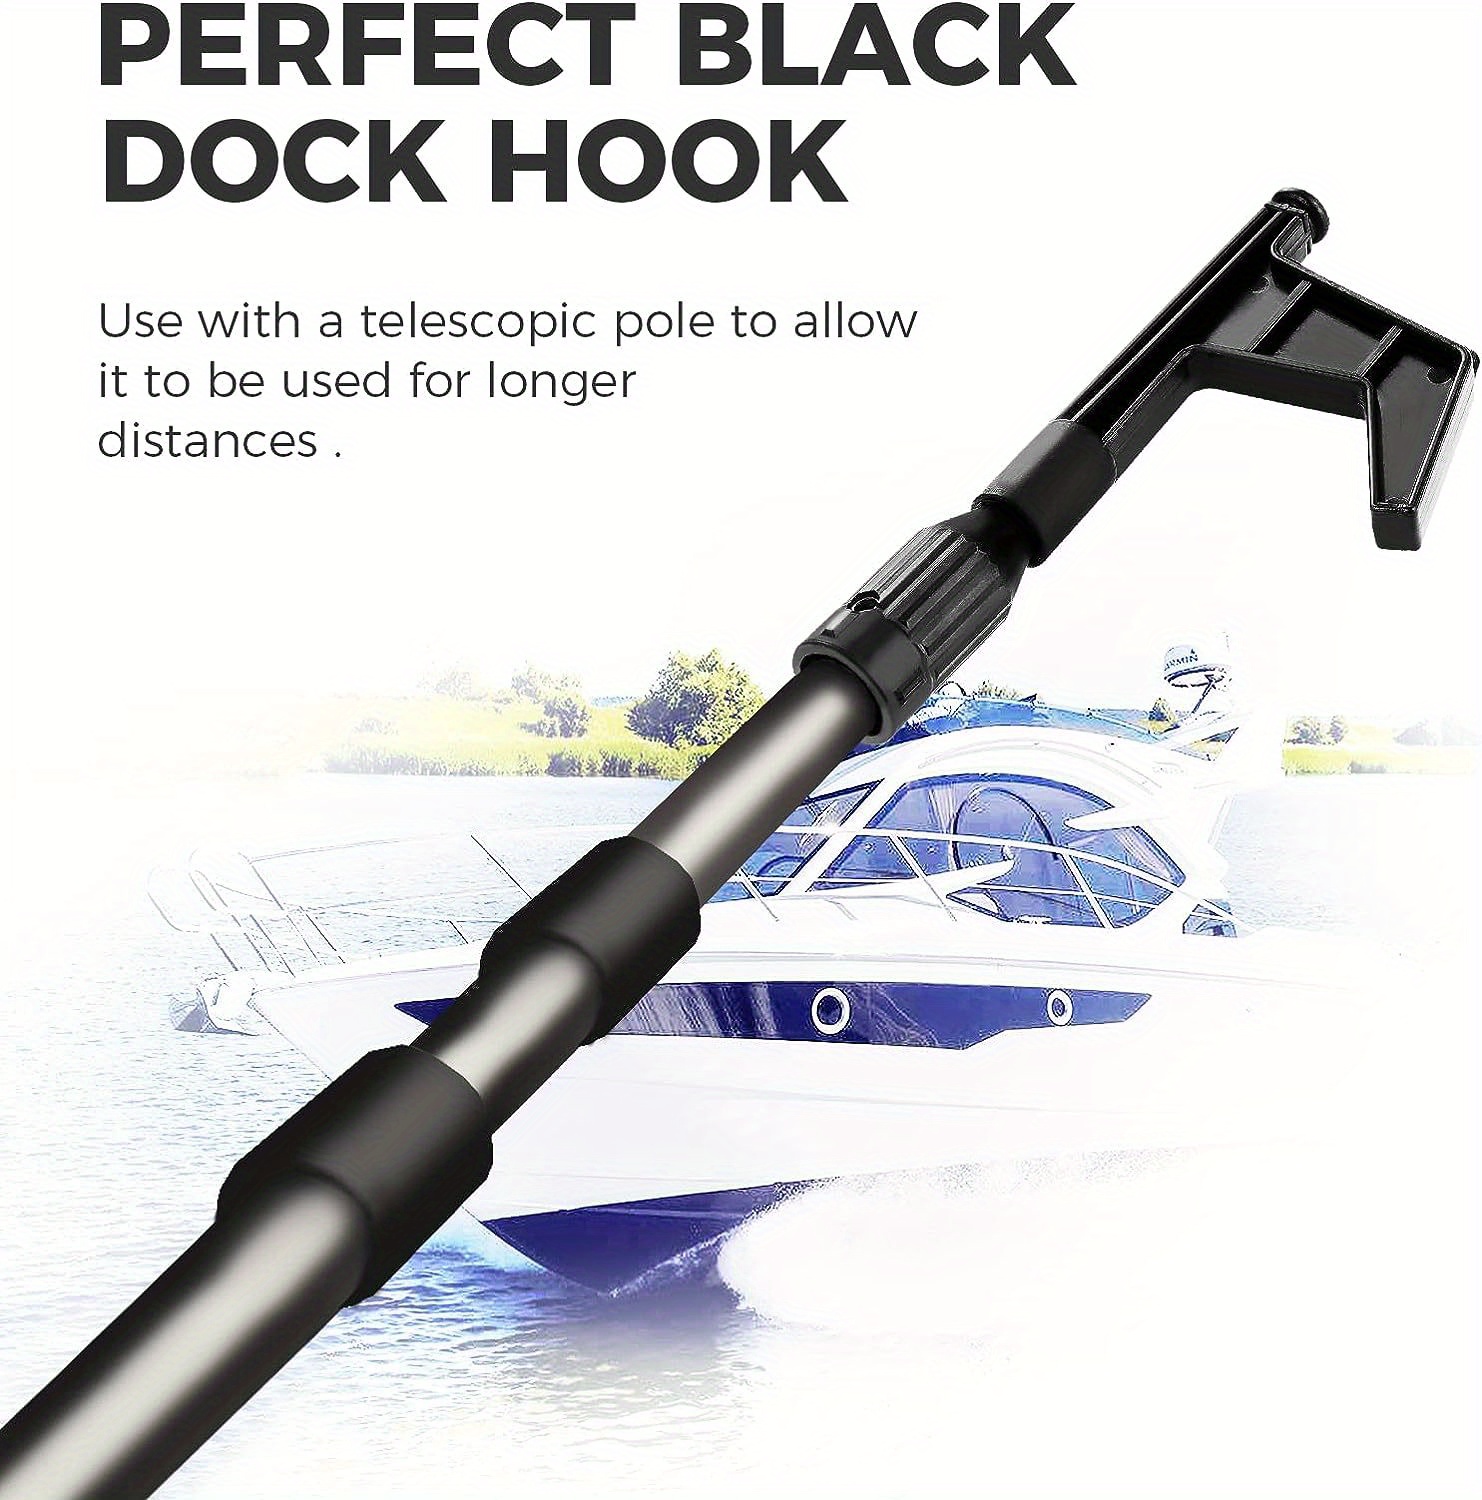 How Do You Use a Boat Hook